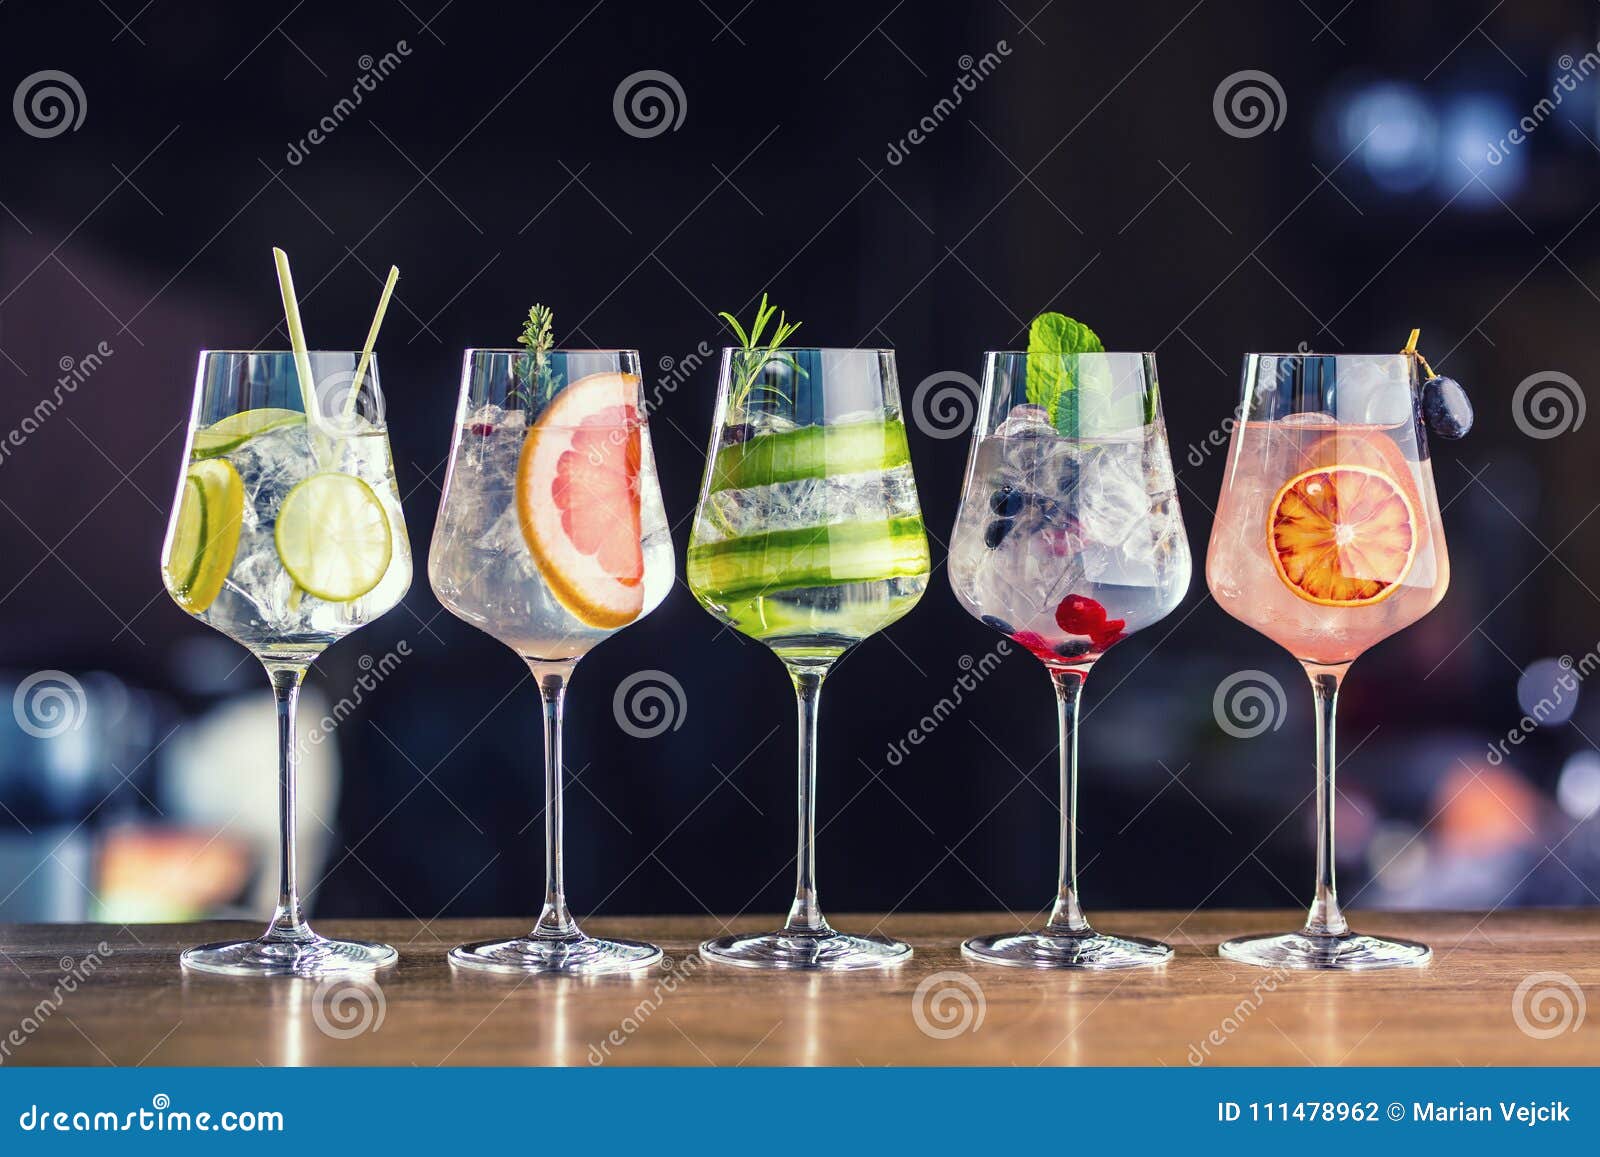 five colorful gin tonic cocktails in wine glasses on bar counter